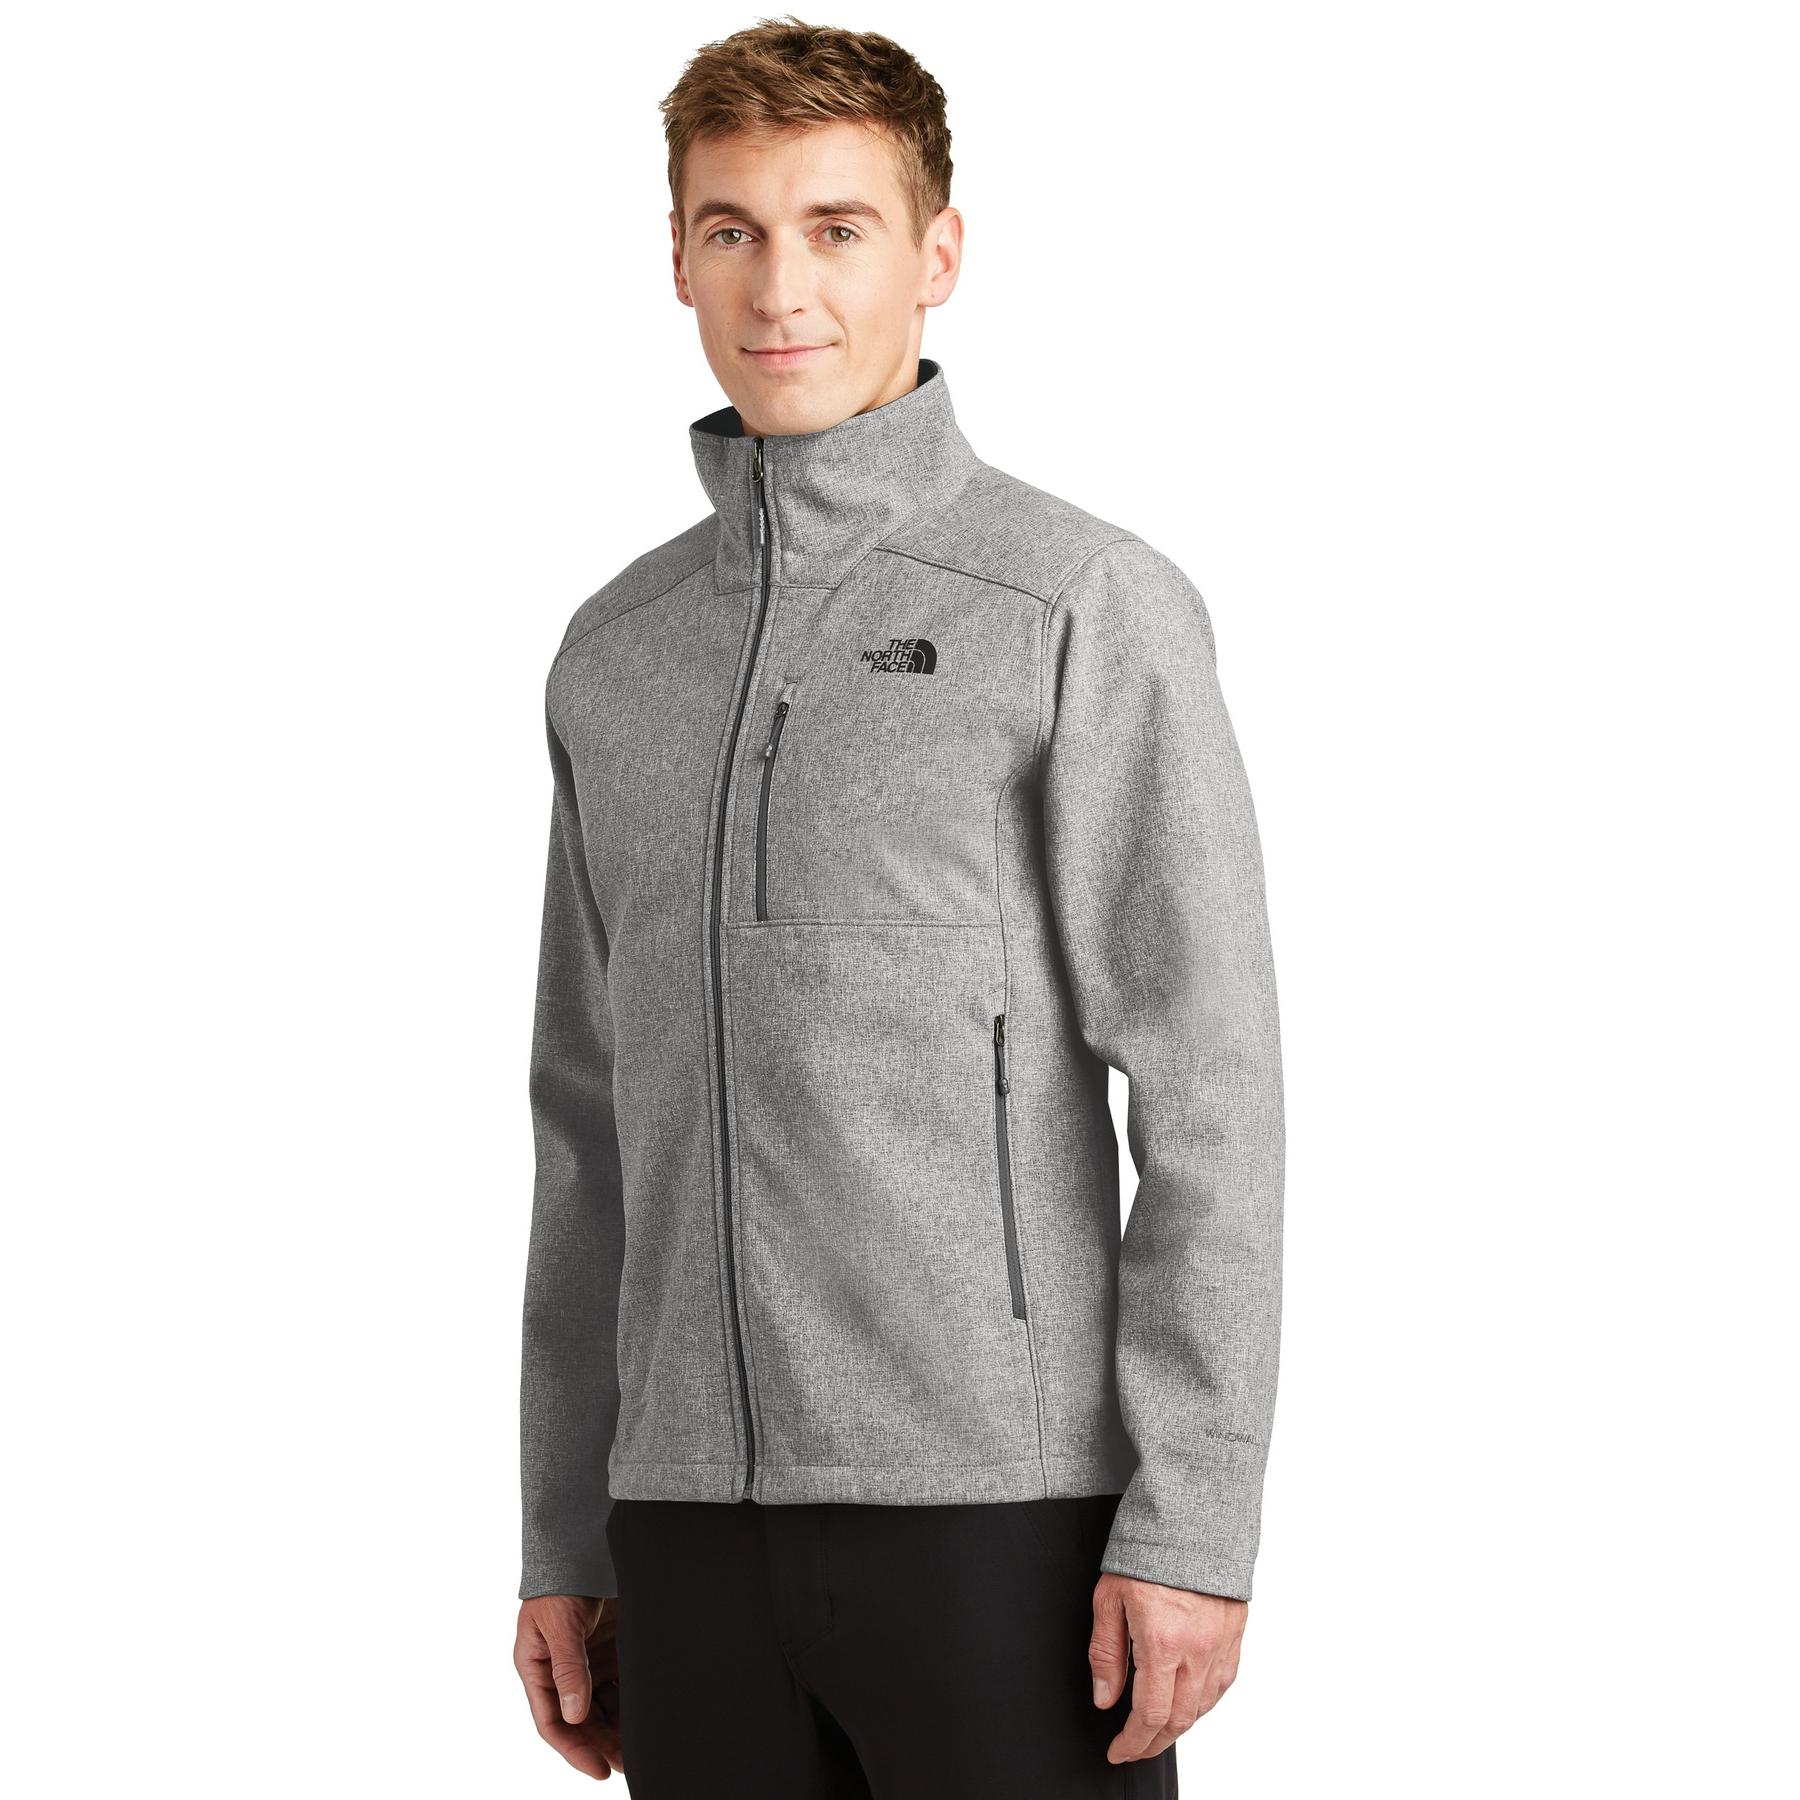 The North Face NF0A3LGT Apex Barrier Soft Shell Jacket - Medium Grey ...